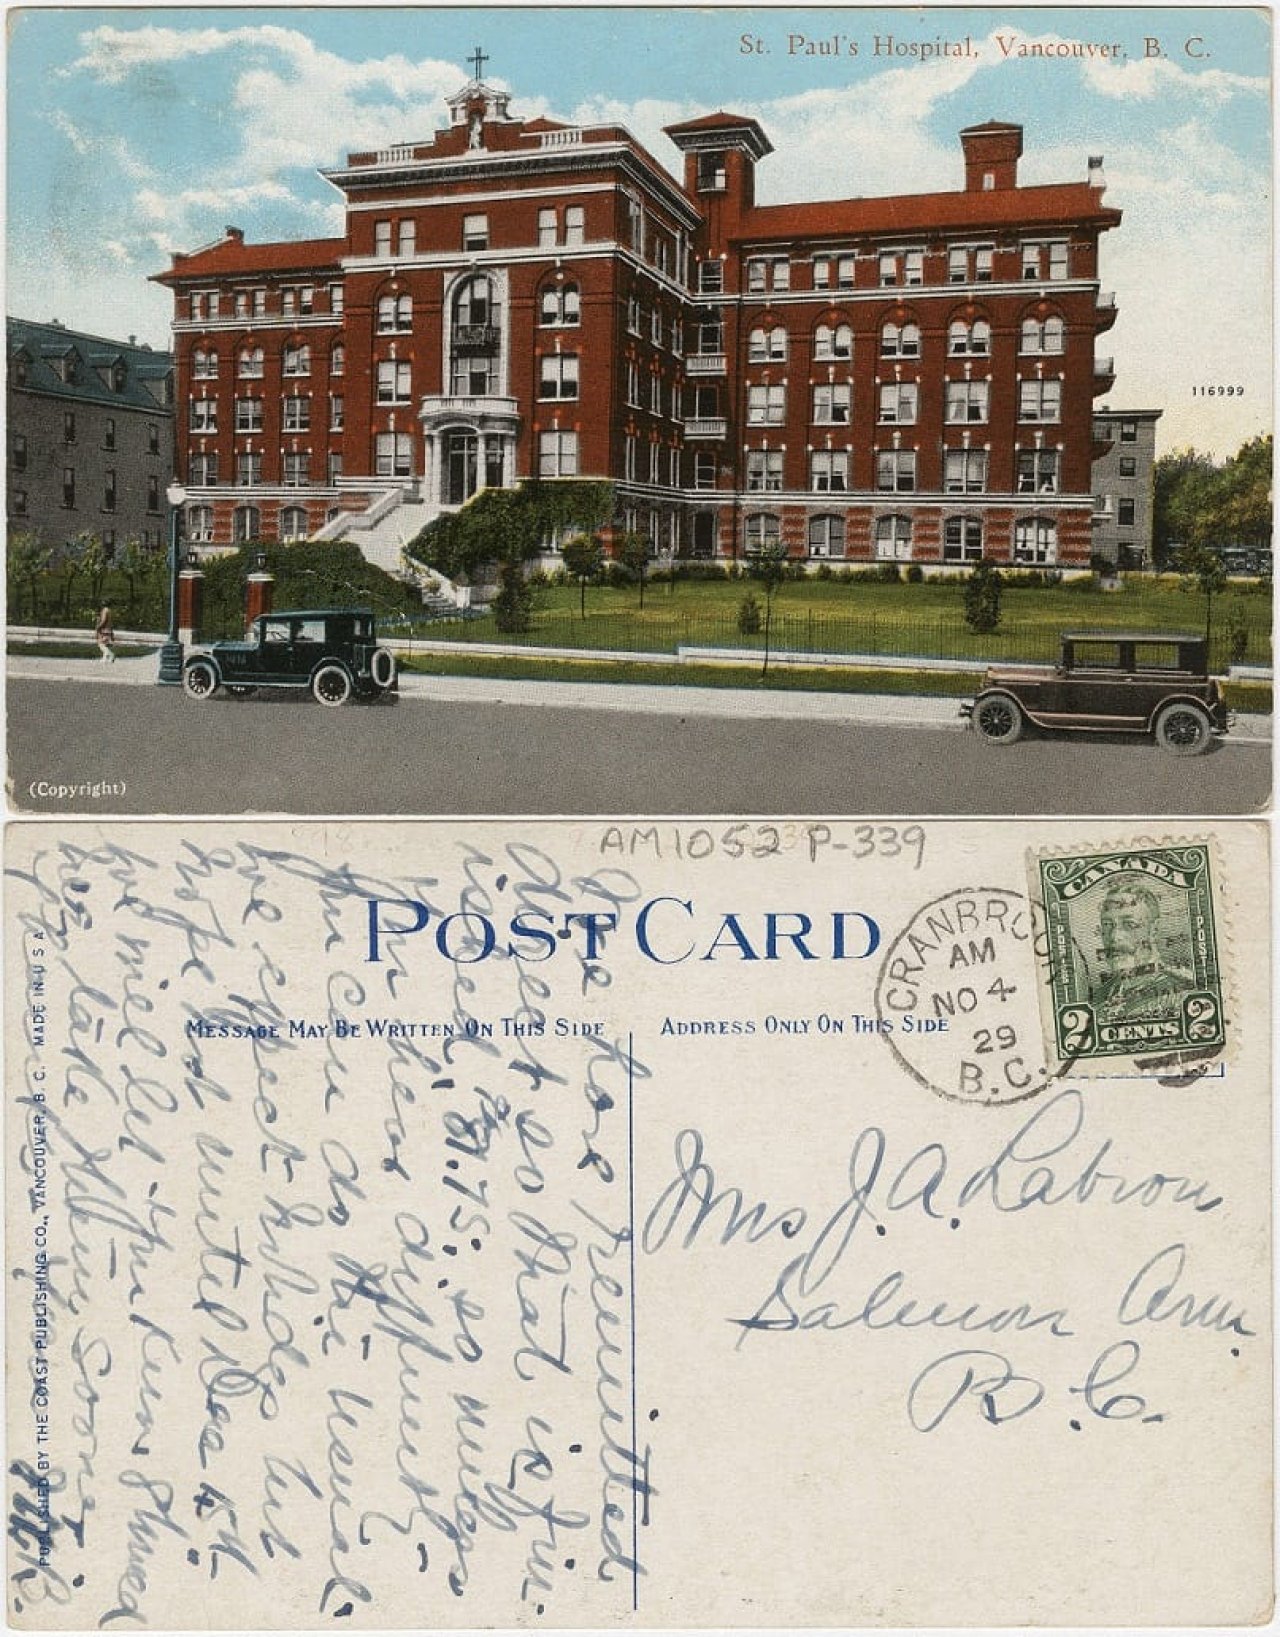 Postcard featuring St. Paul's Hospital from 1929. City of Vancouver Archives, AM1052 P-339.